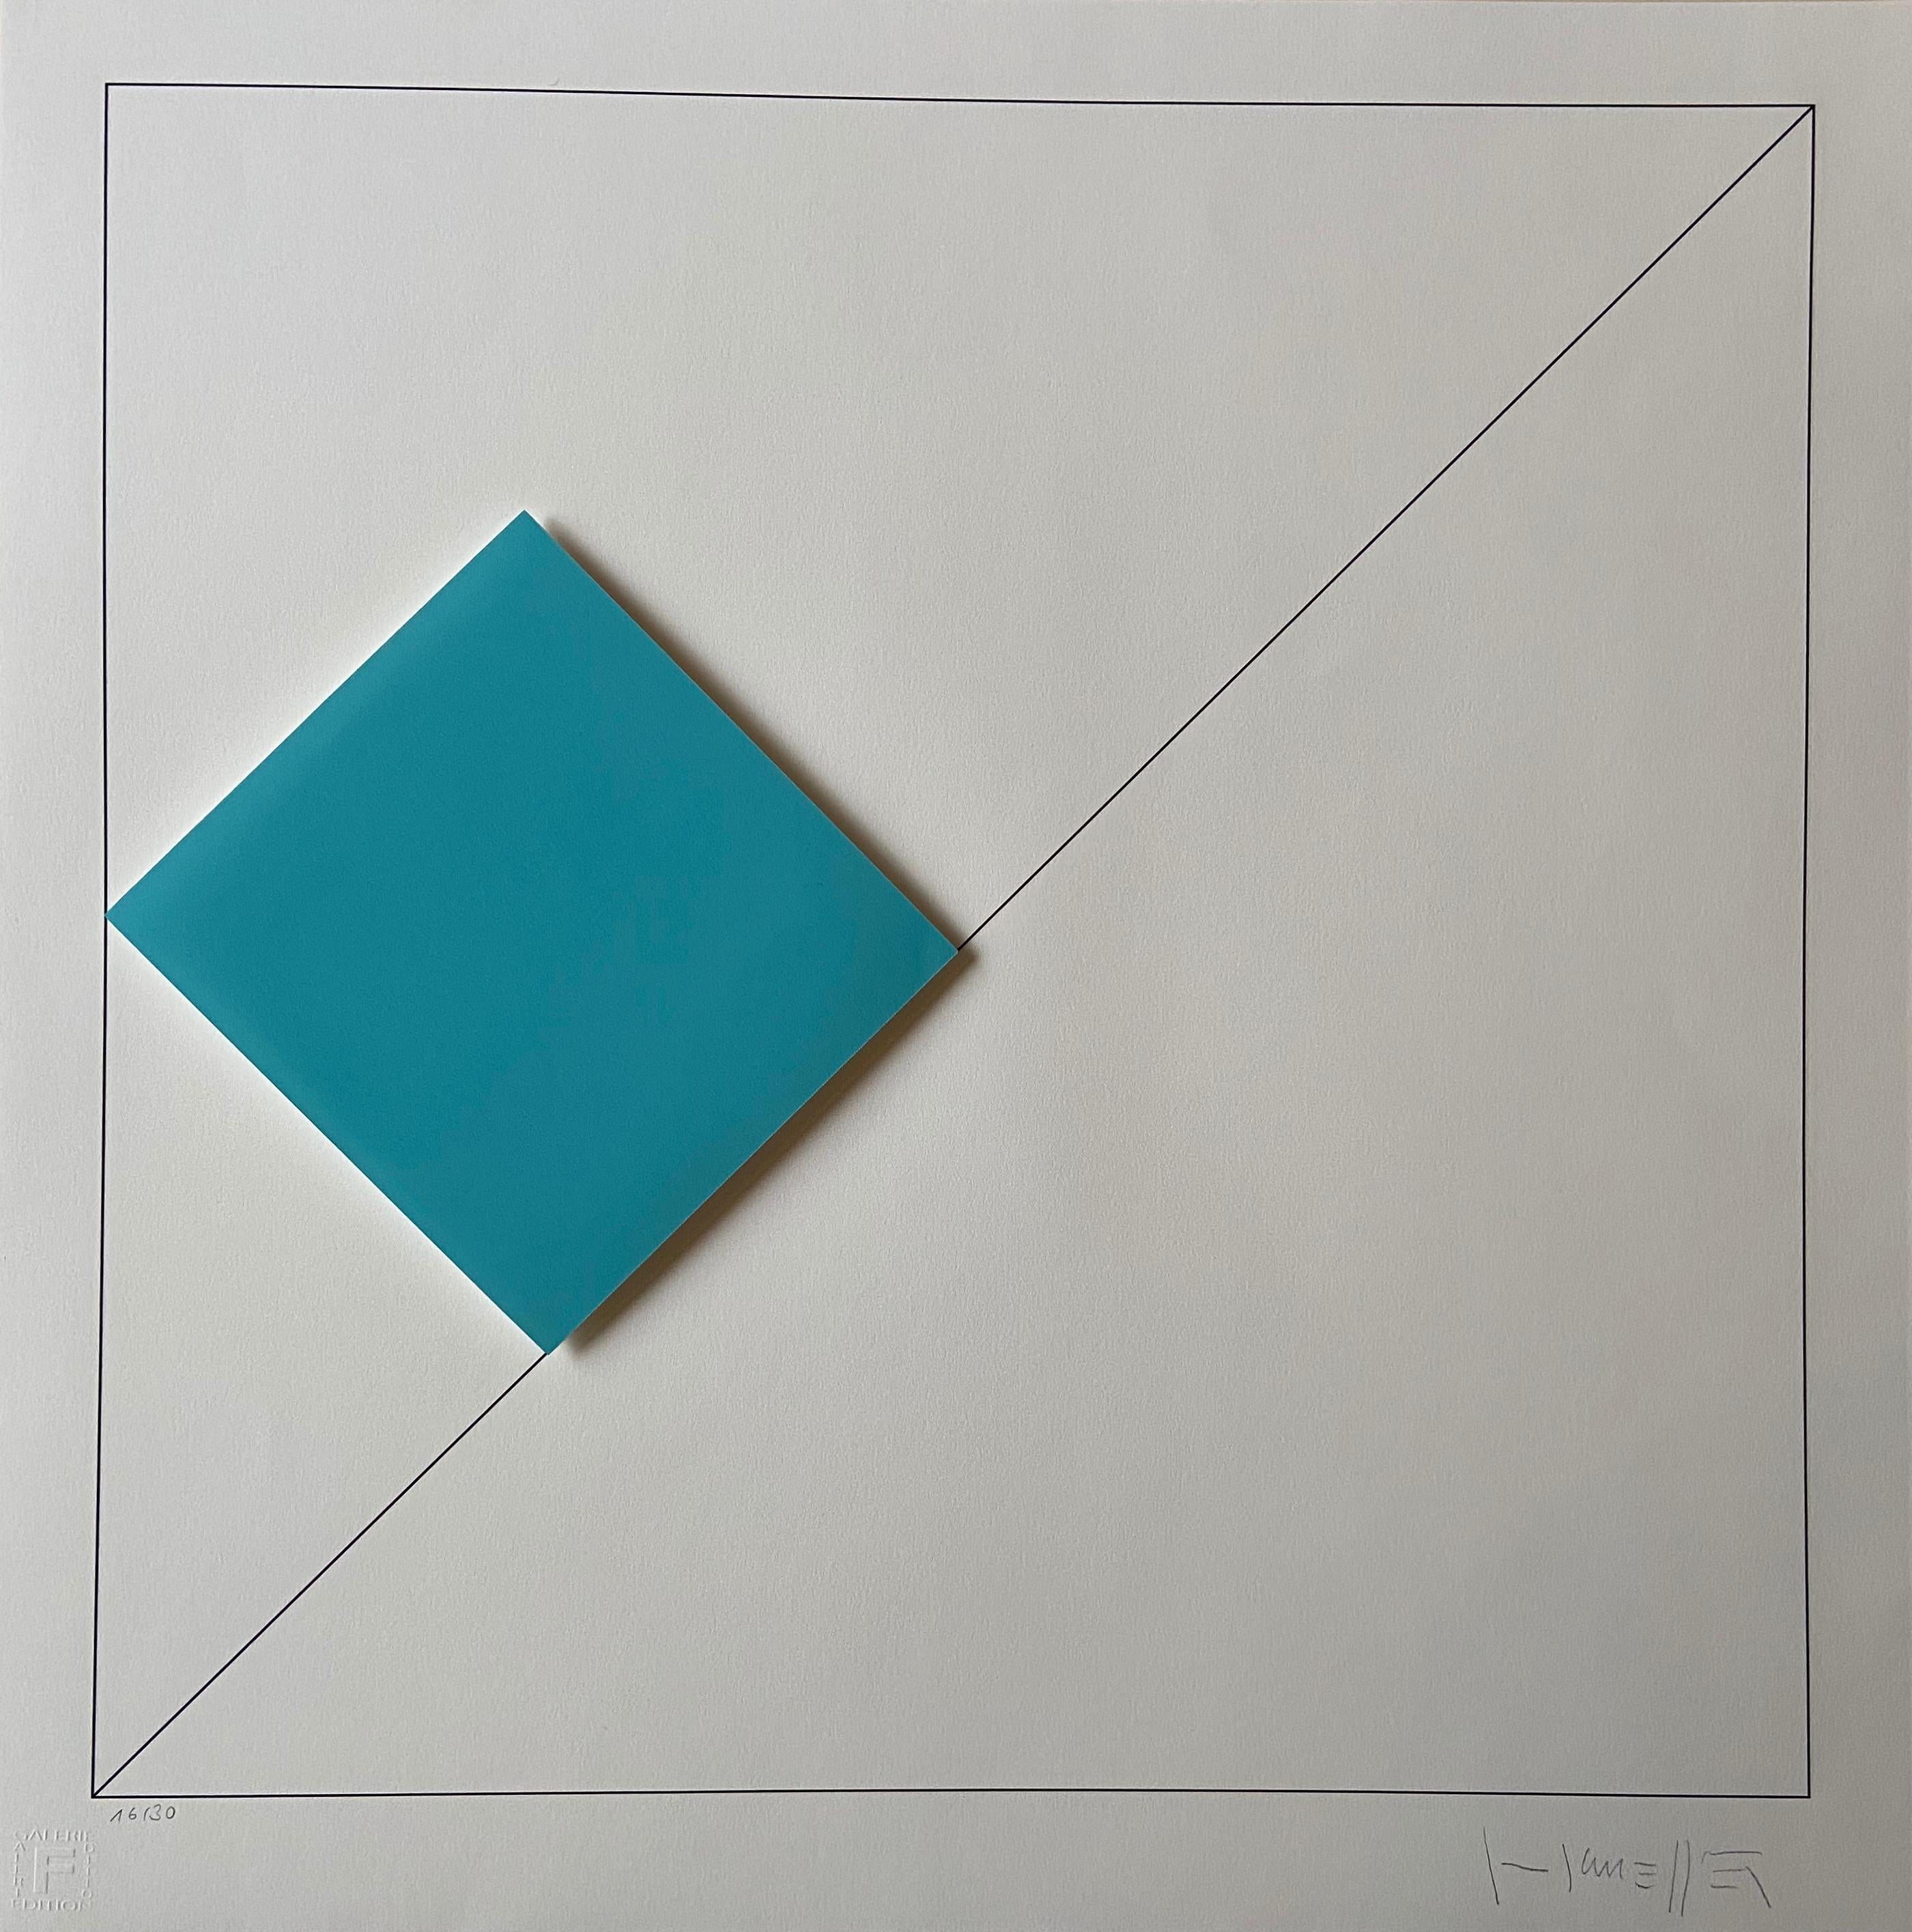 Gottfried Honegger
Composition 1 3D square (light blue) 
2015
Silkscreen print signed in pencil and numbered on 30 copies by the artist.
Dry stamp of the publisher in the margin at the lower left corner.
Condition: excellent; the work has never been